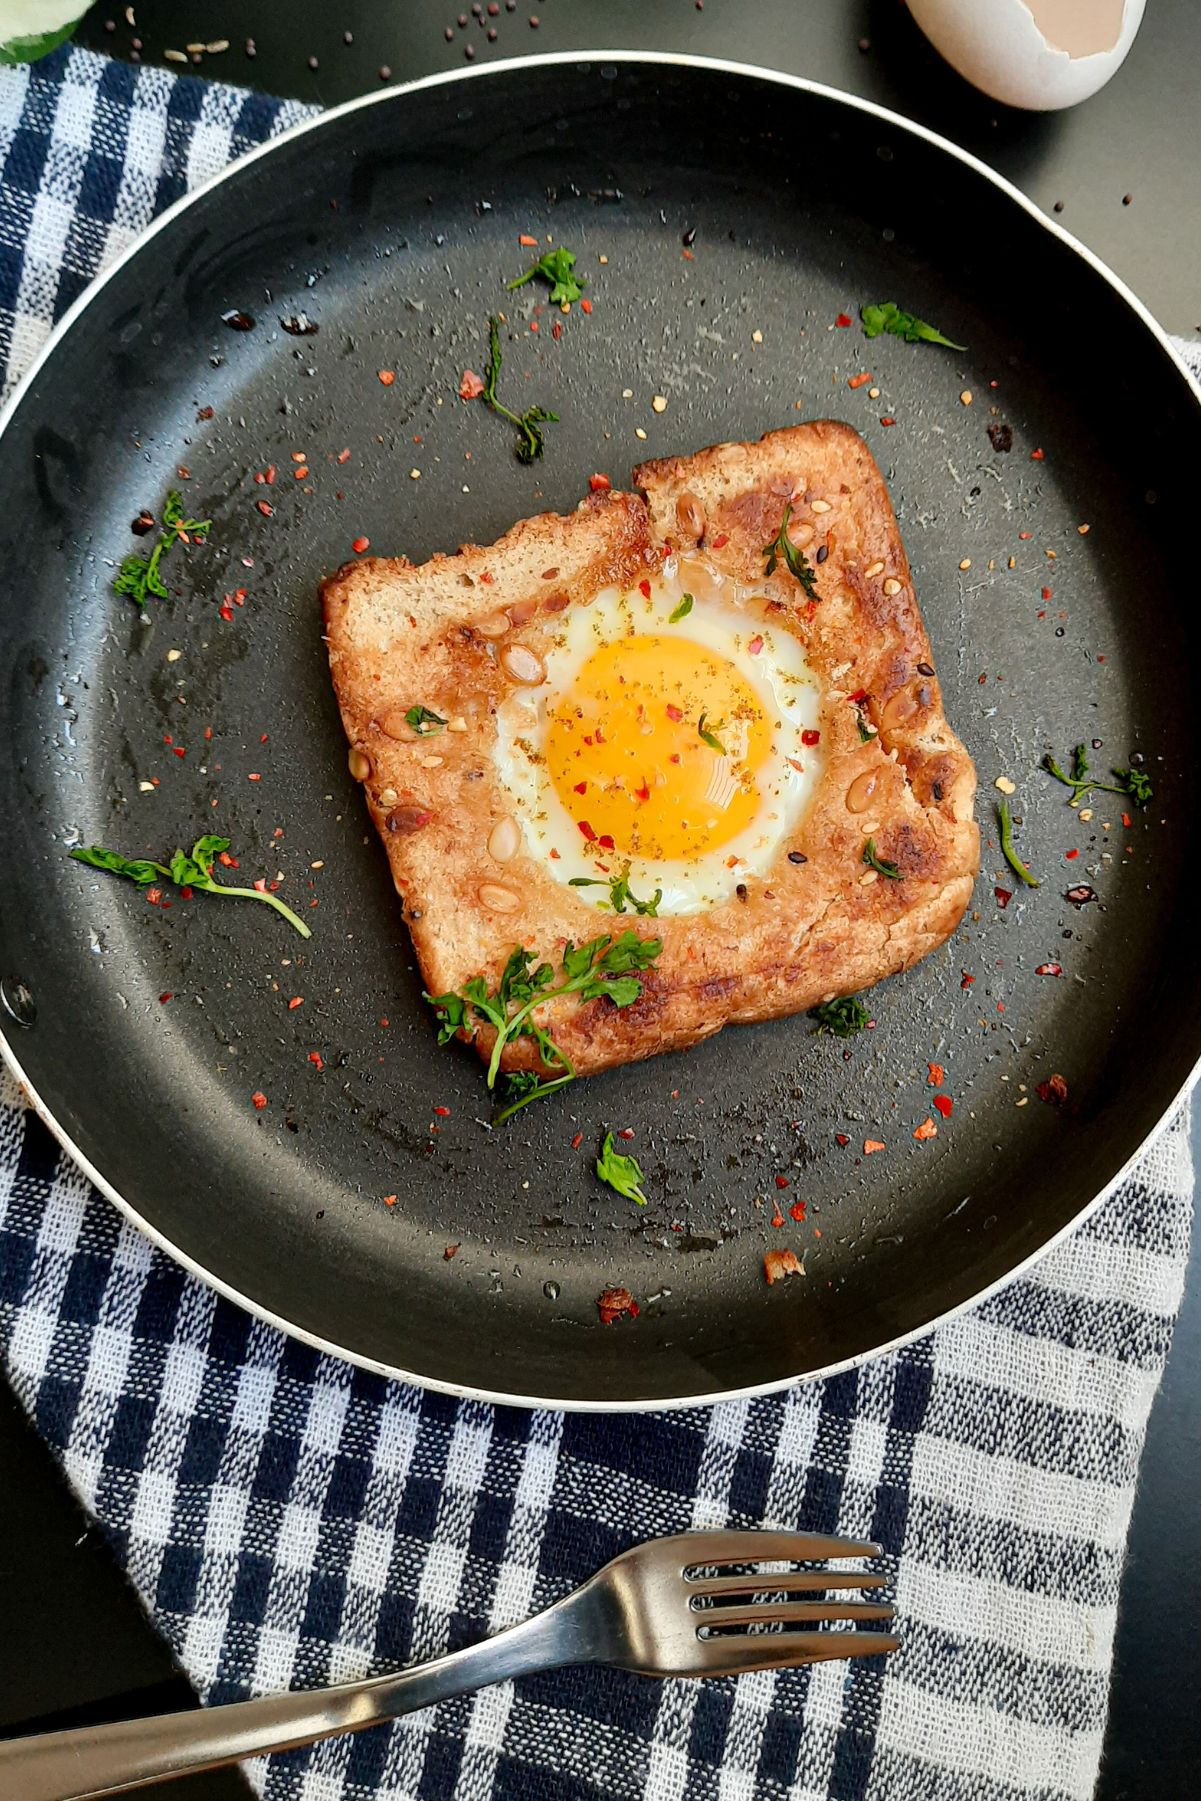 Weight Watchers Egg in a Nest in a skillet on a blue and white kitchen towel.